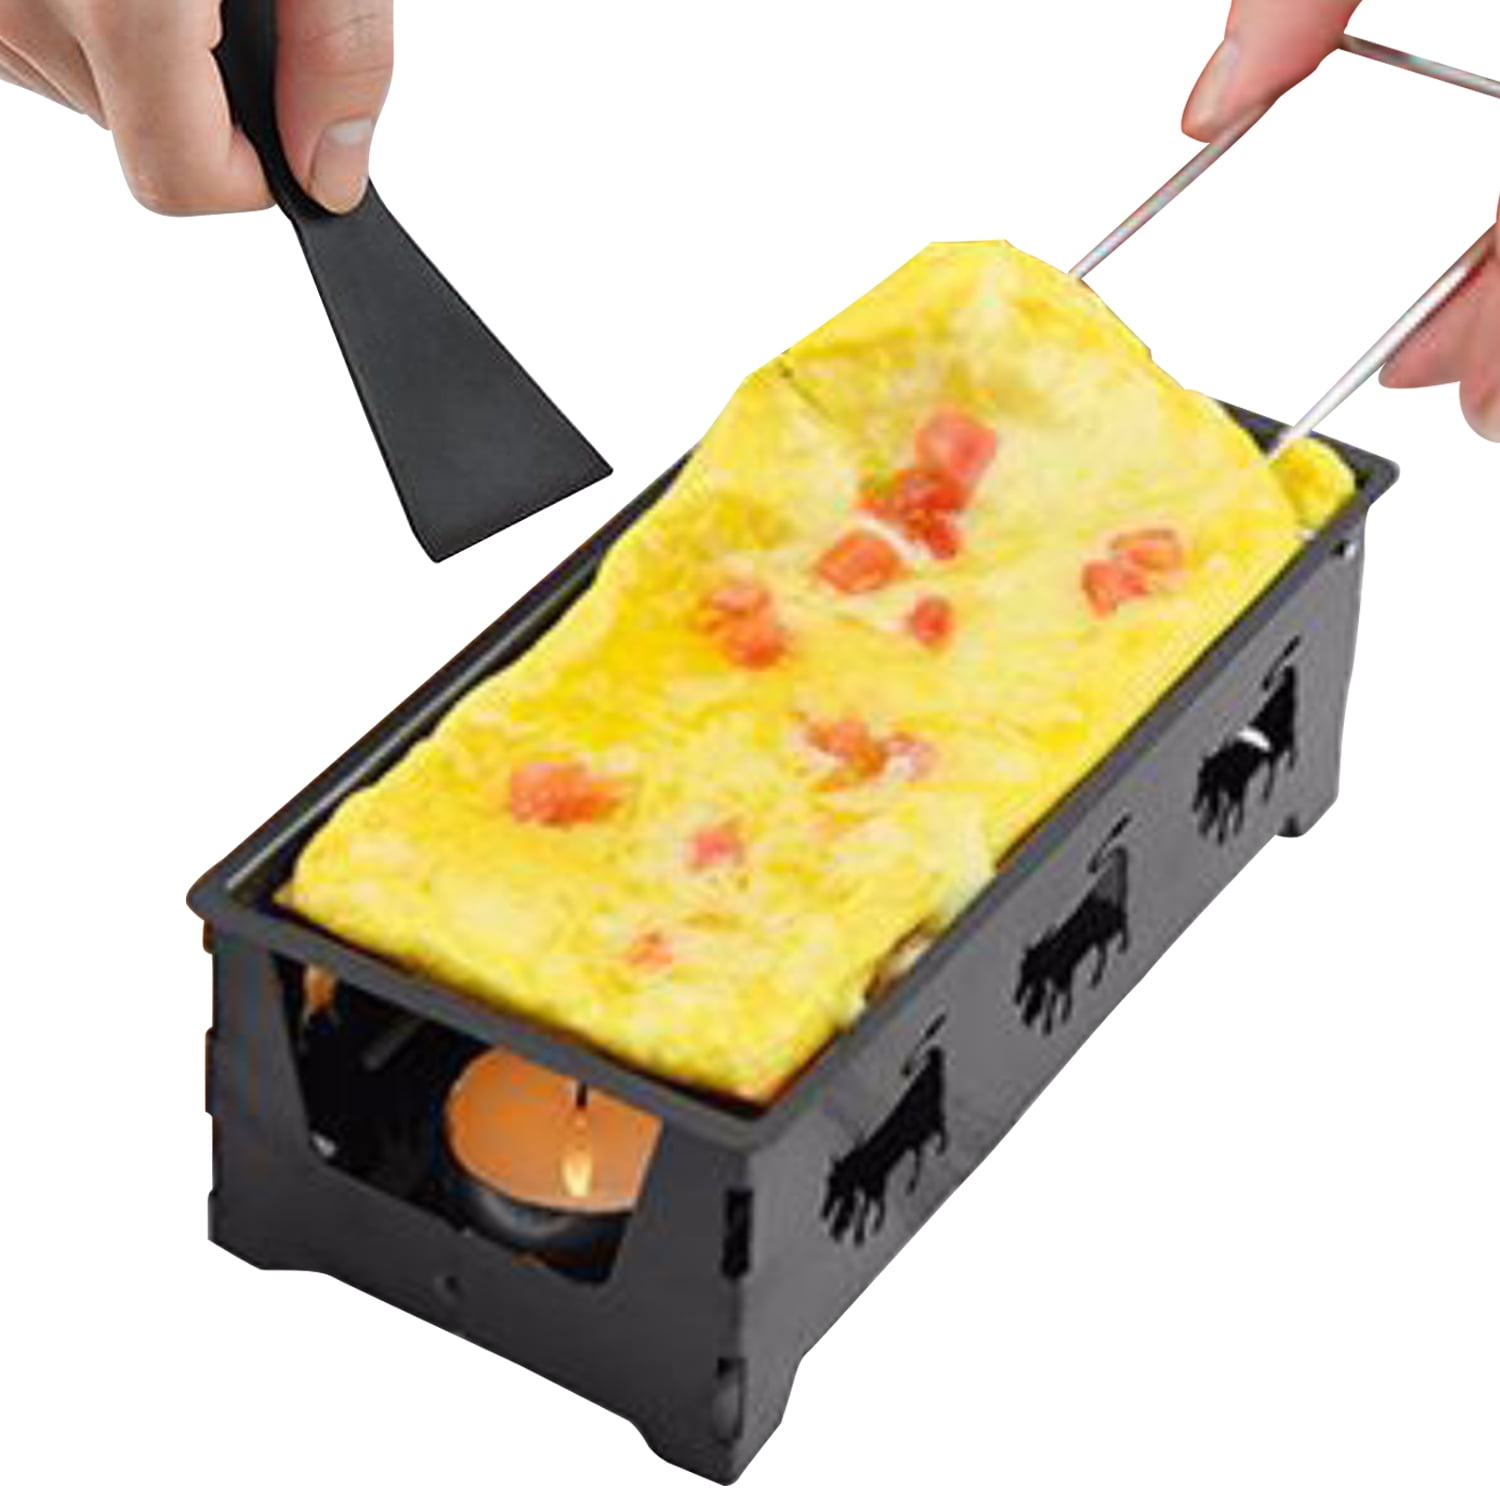 Non-Stick Raclette Grill Set Cheese Melter Pan Spatula Foldable Handle Cheese Raclette Carbon Steel Gadgets Walmart.com